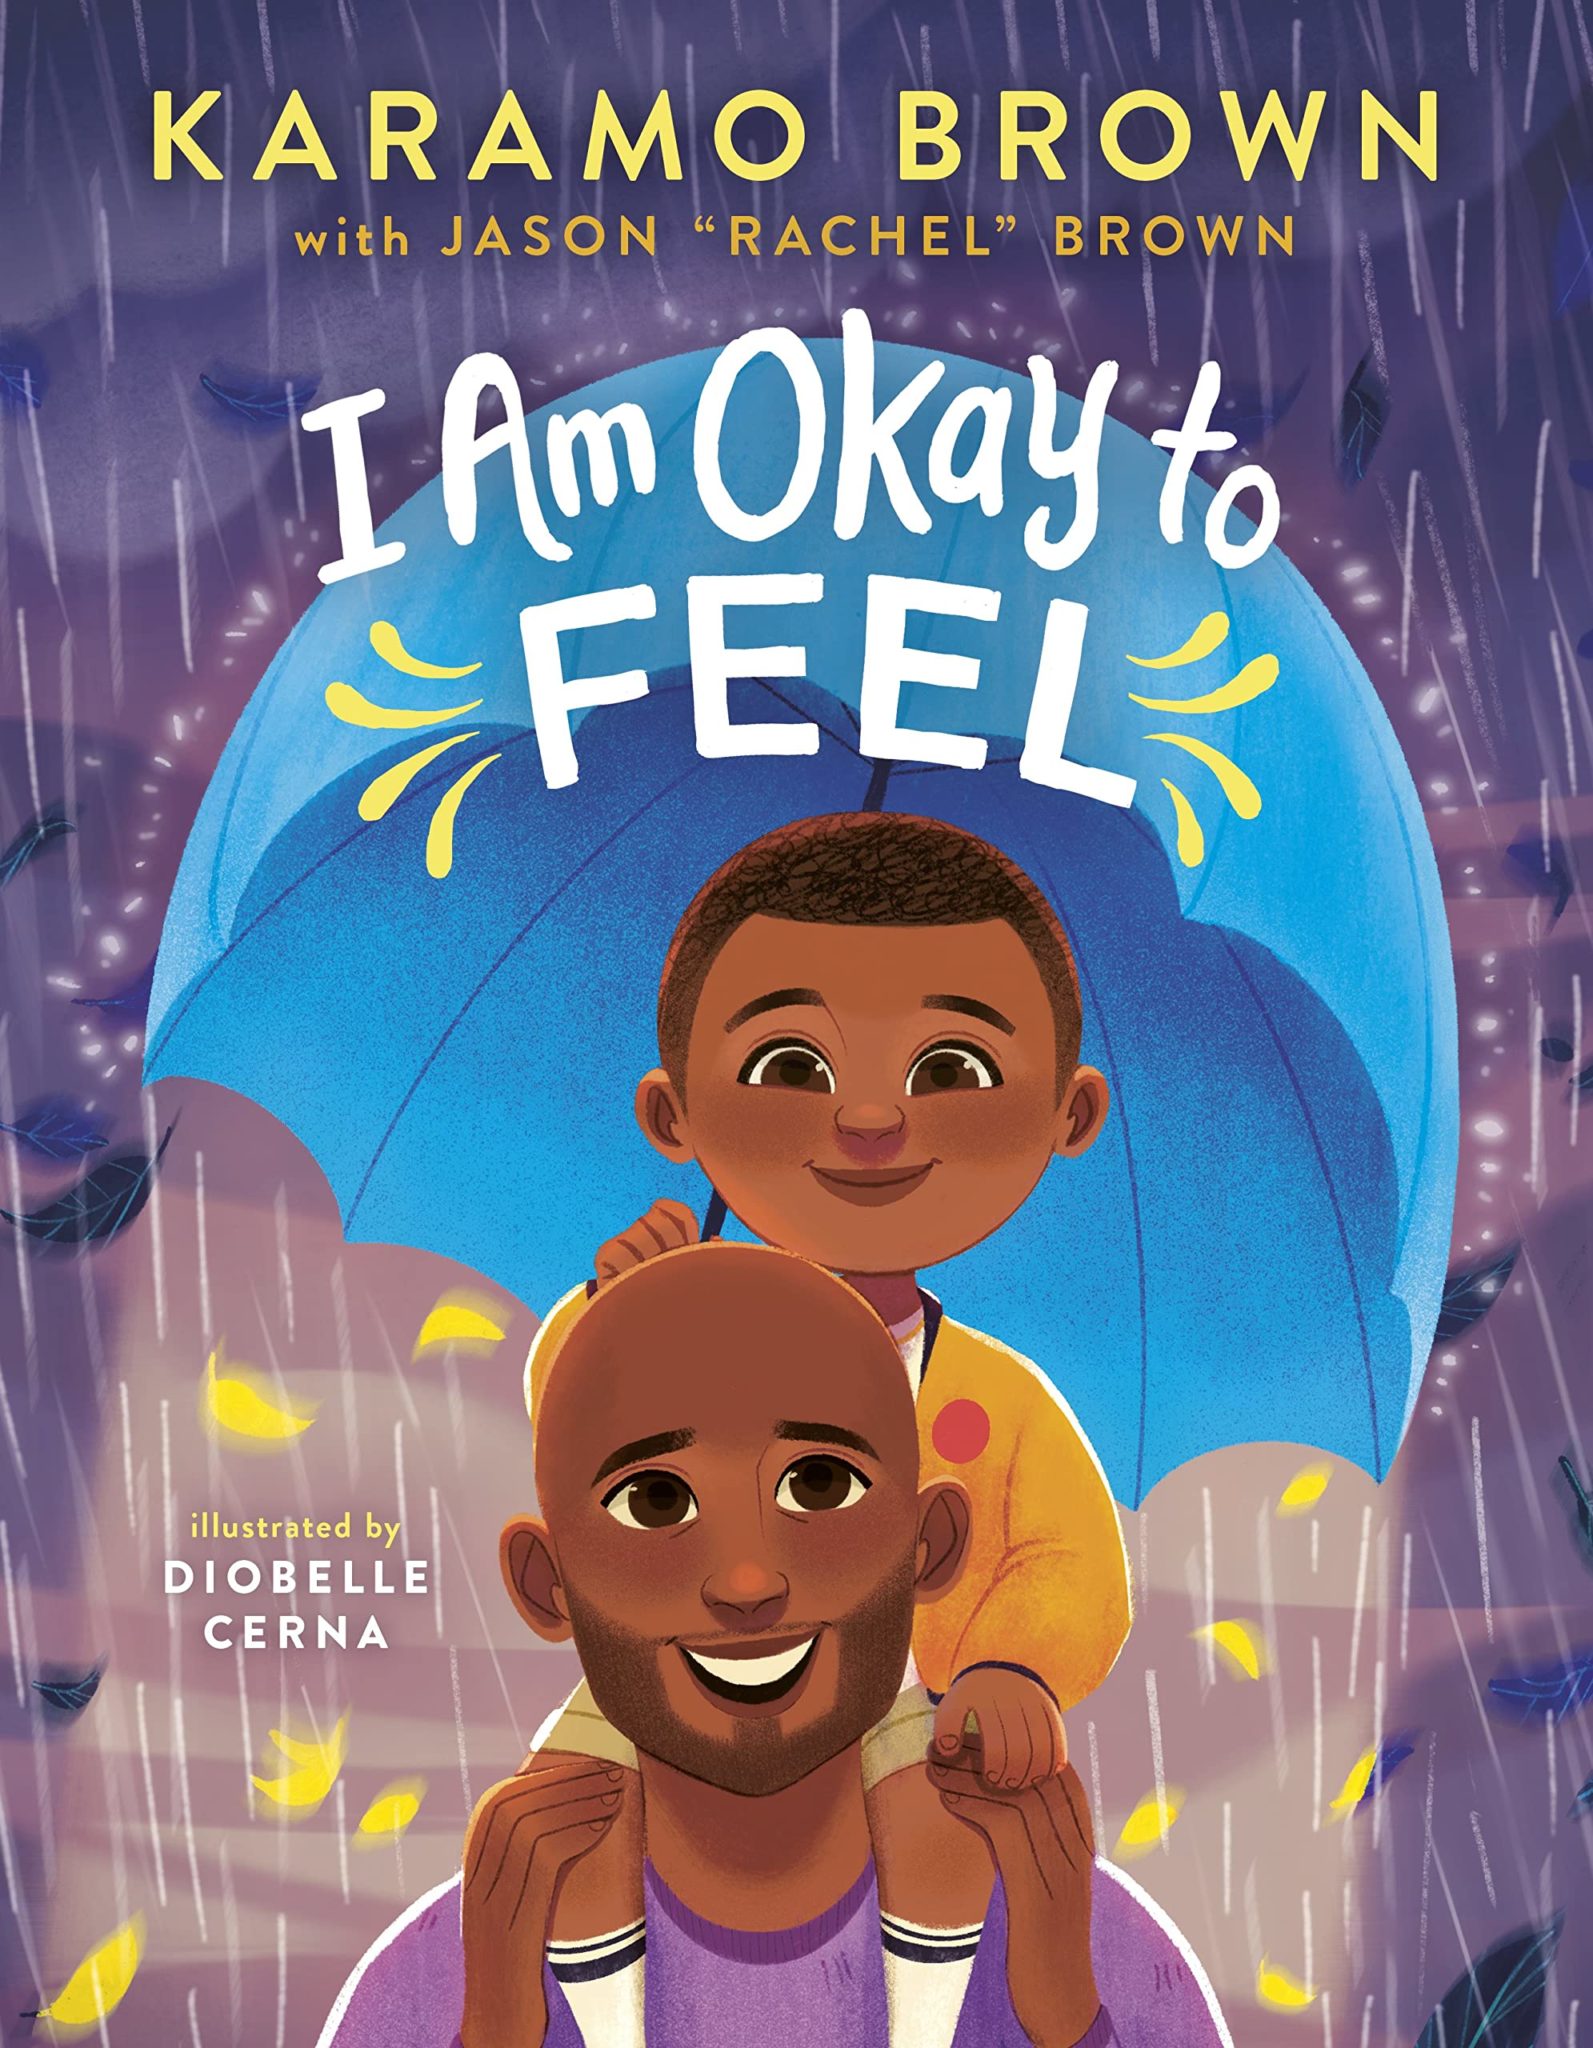 The cover of the picture book "I Am Okay to Feel" features a boy sitting on his smiling dad's shoulders. The boy holds an umbrella to protect them from a rainstorm.